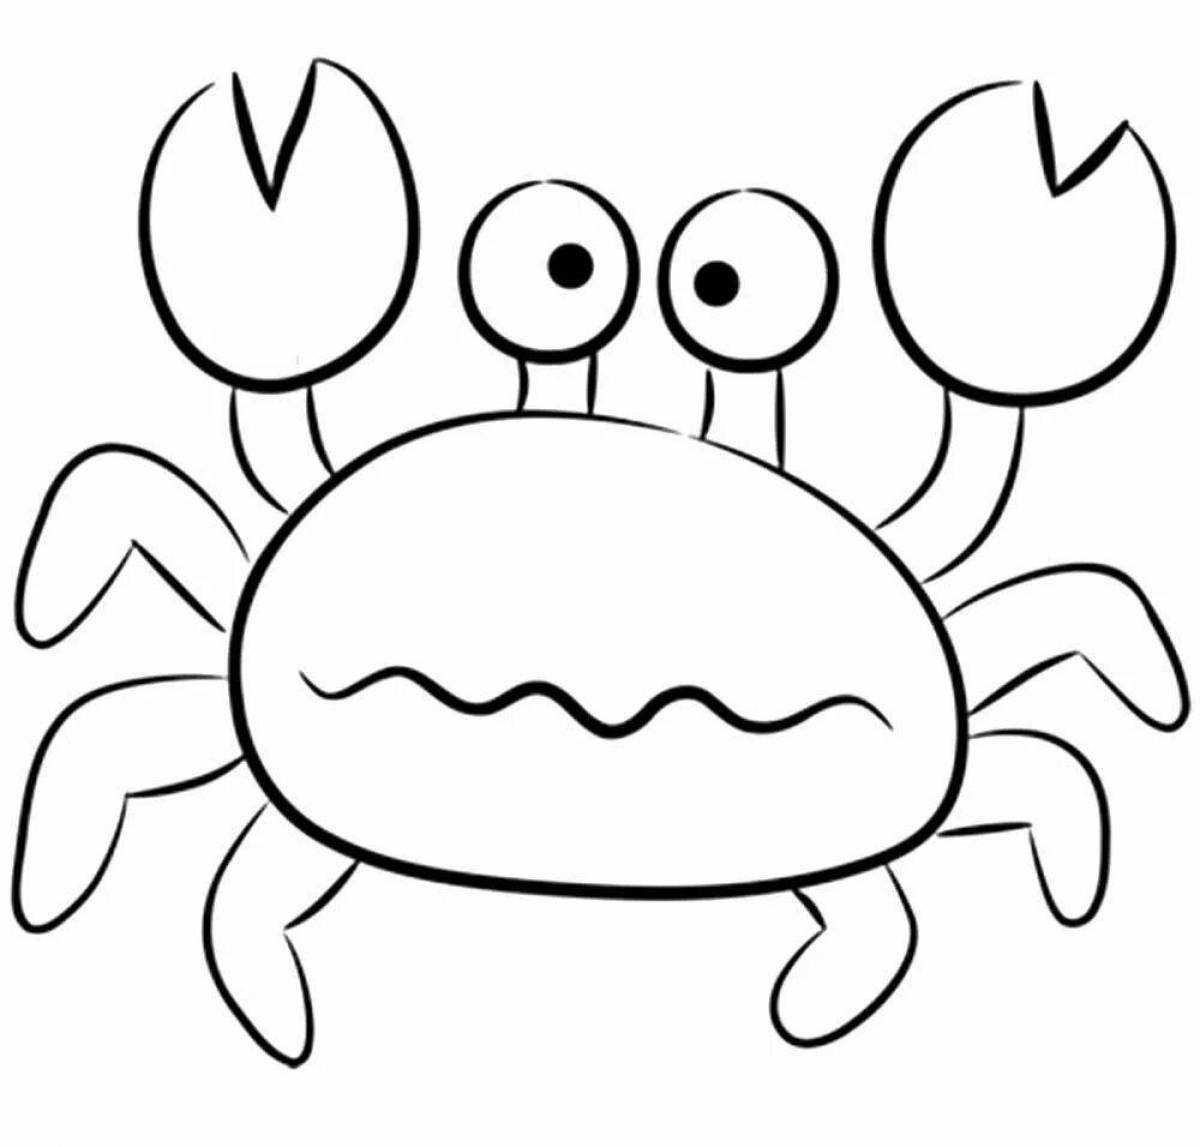 Playful crab coloring page for kids